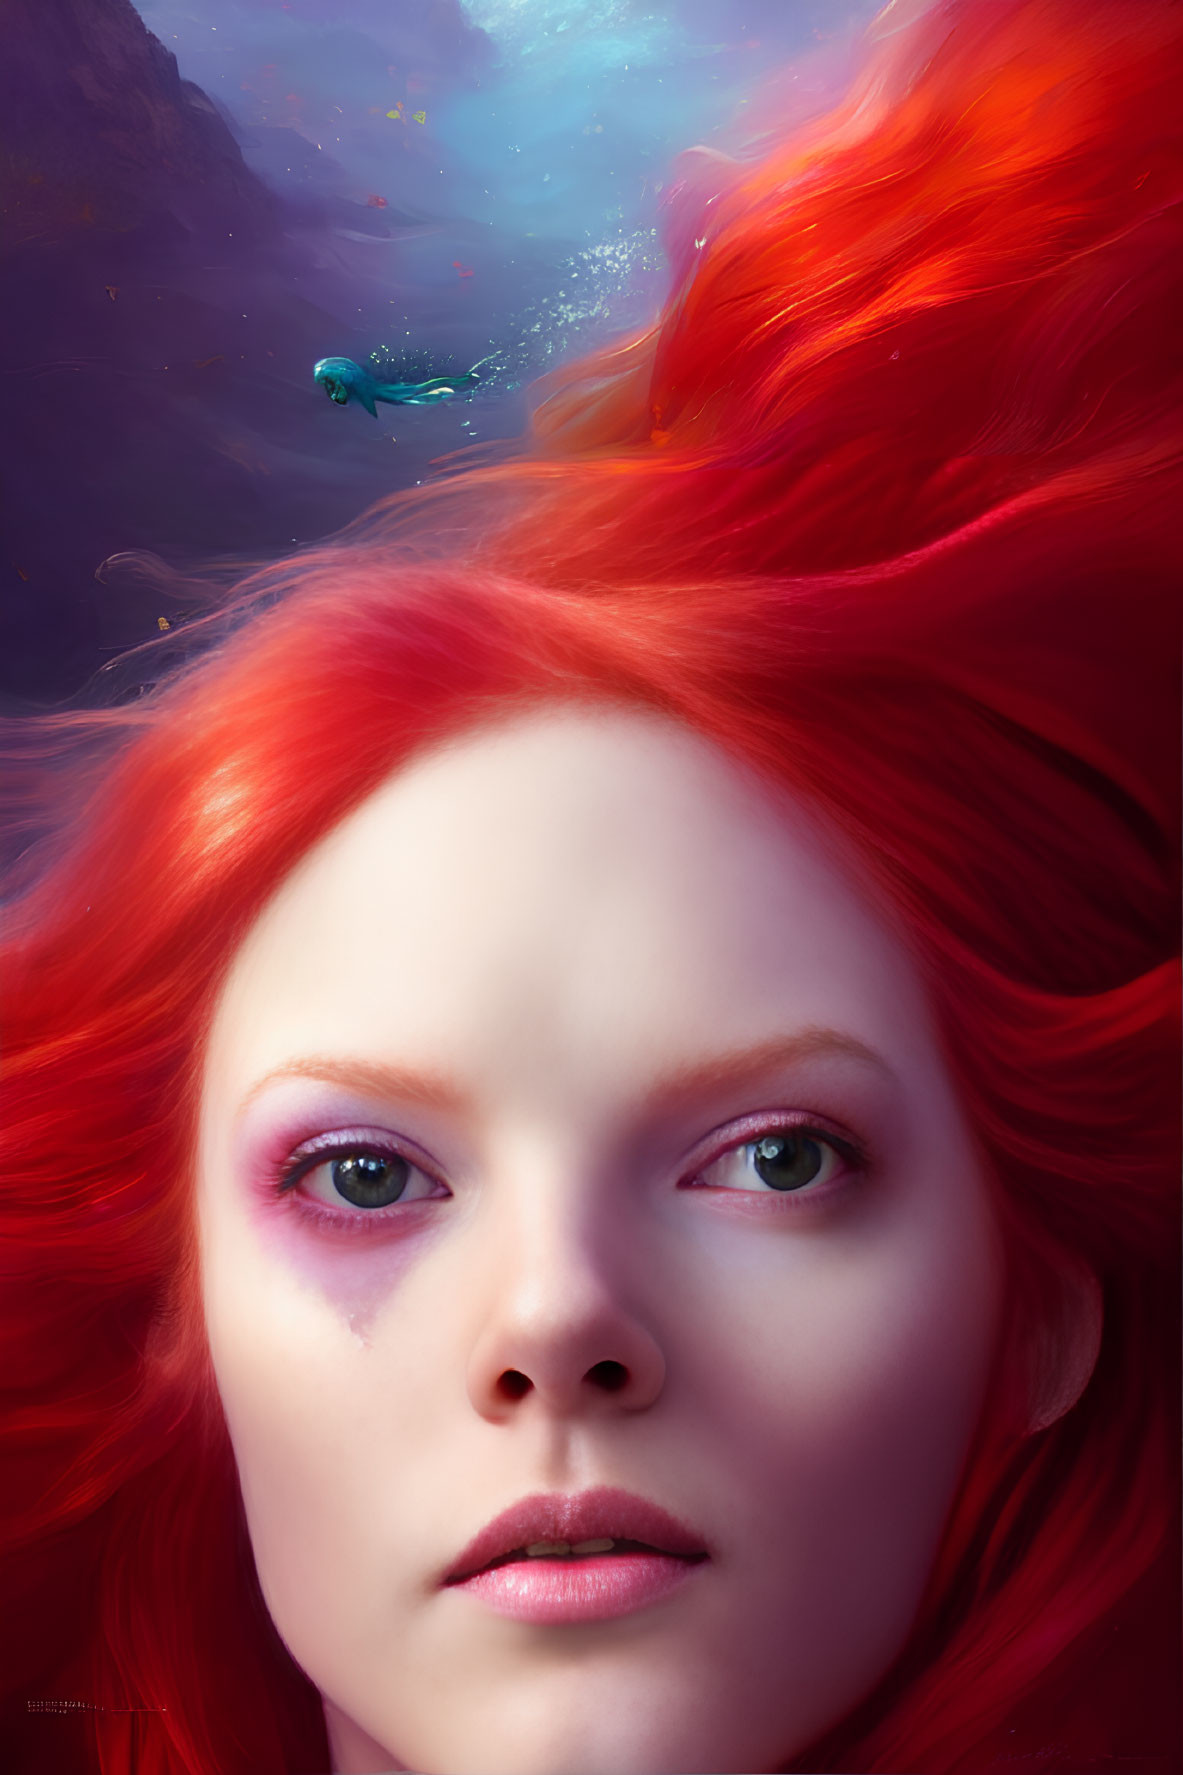 Digital art portrait of woman with red hair and cosmic backdrop